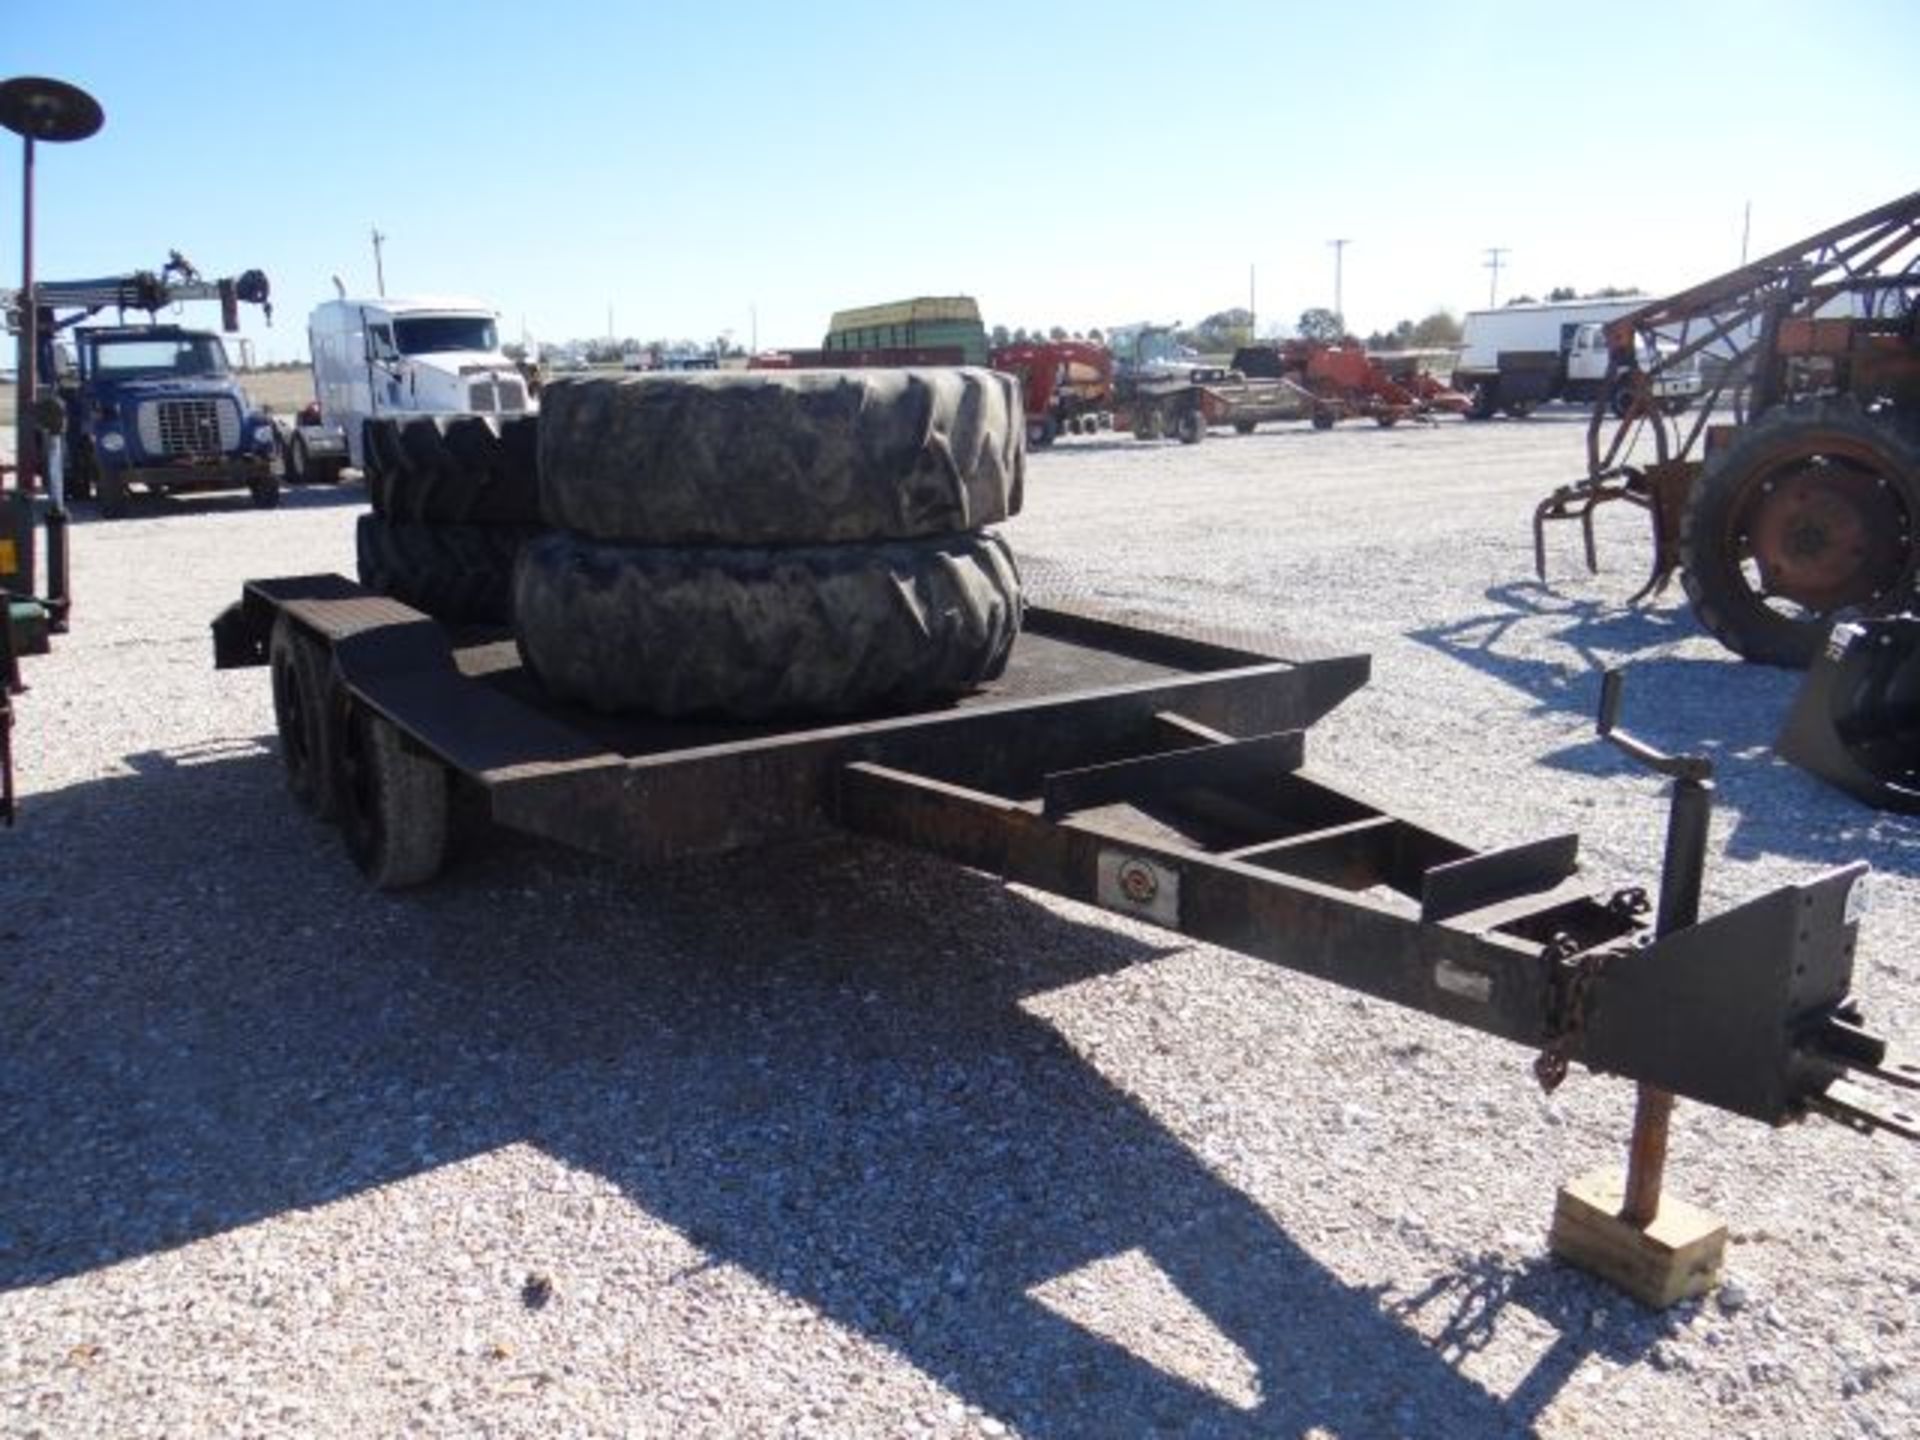 Homemade Skid Steer Trailer 12'x6'6" Steel Bed, Tandem Axle, Bumper Hitch, No Title - Image 2 of 3